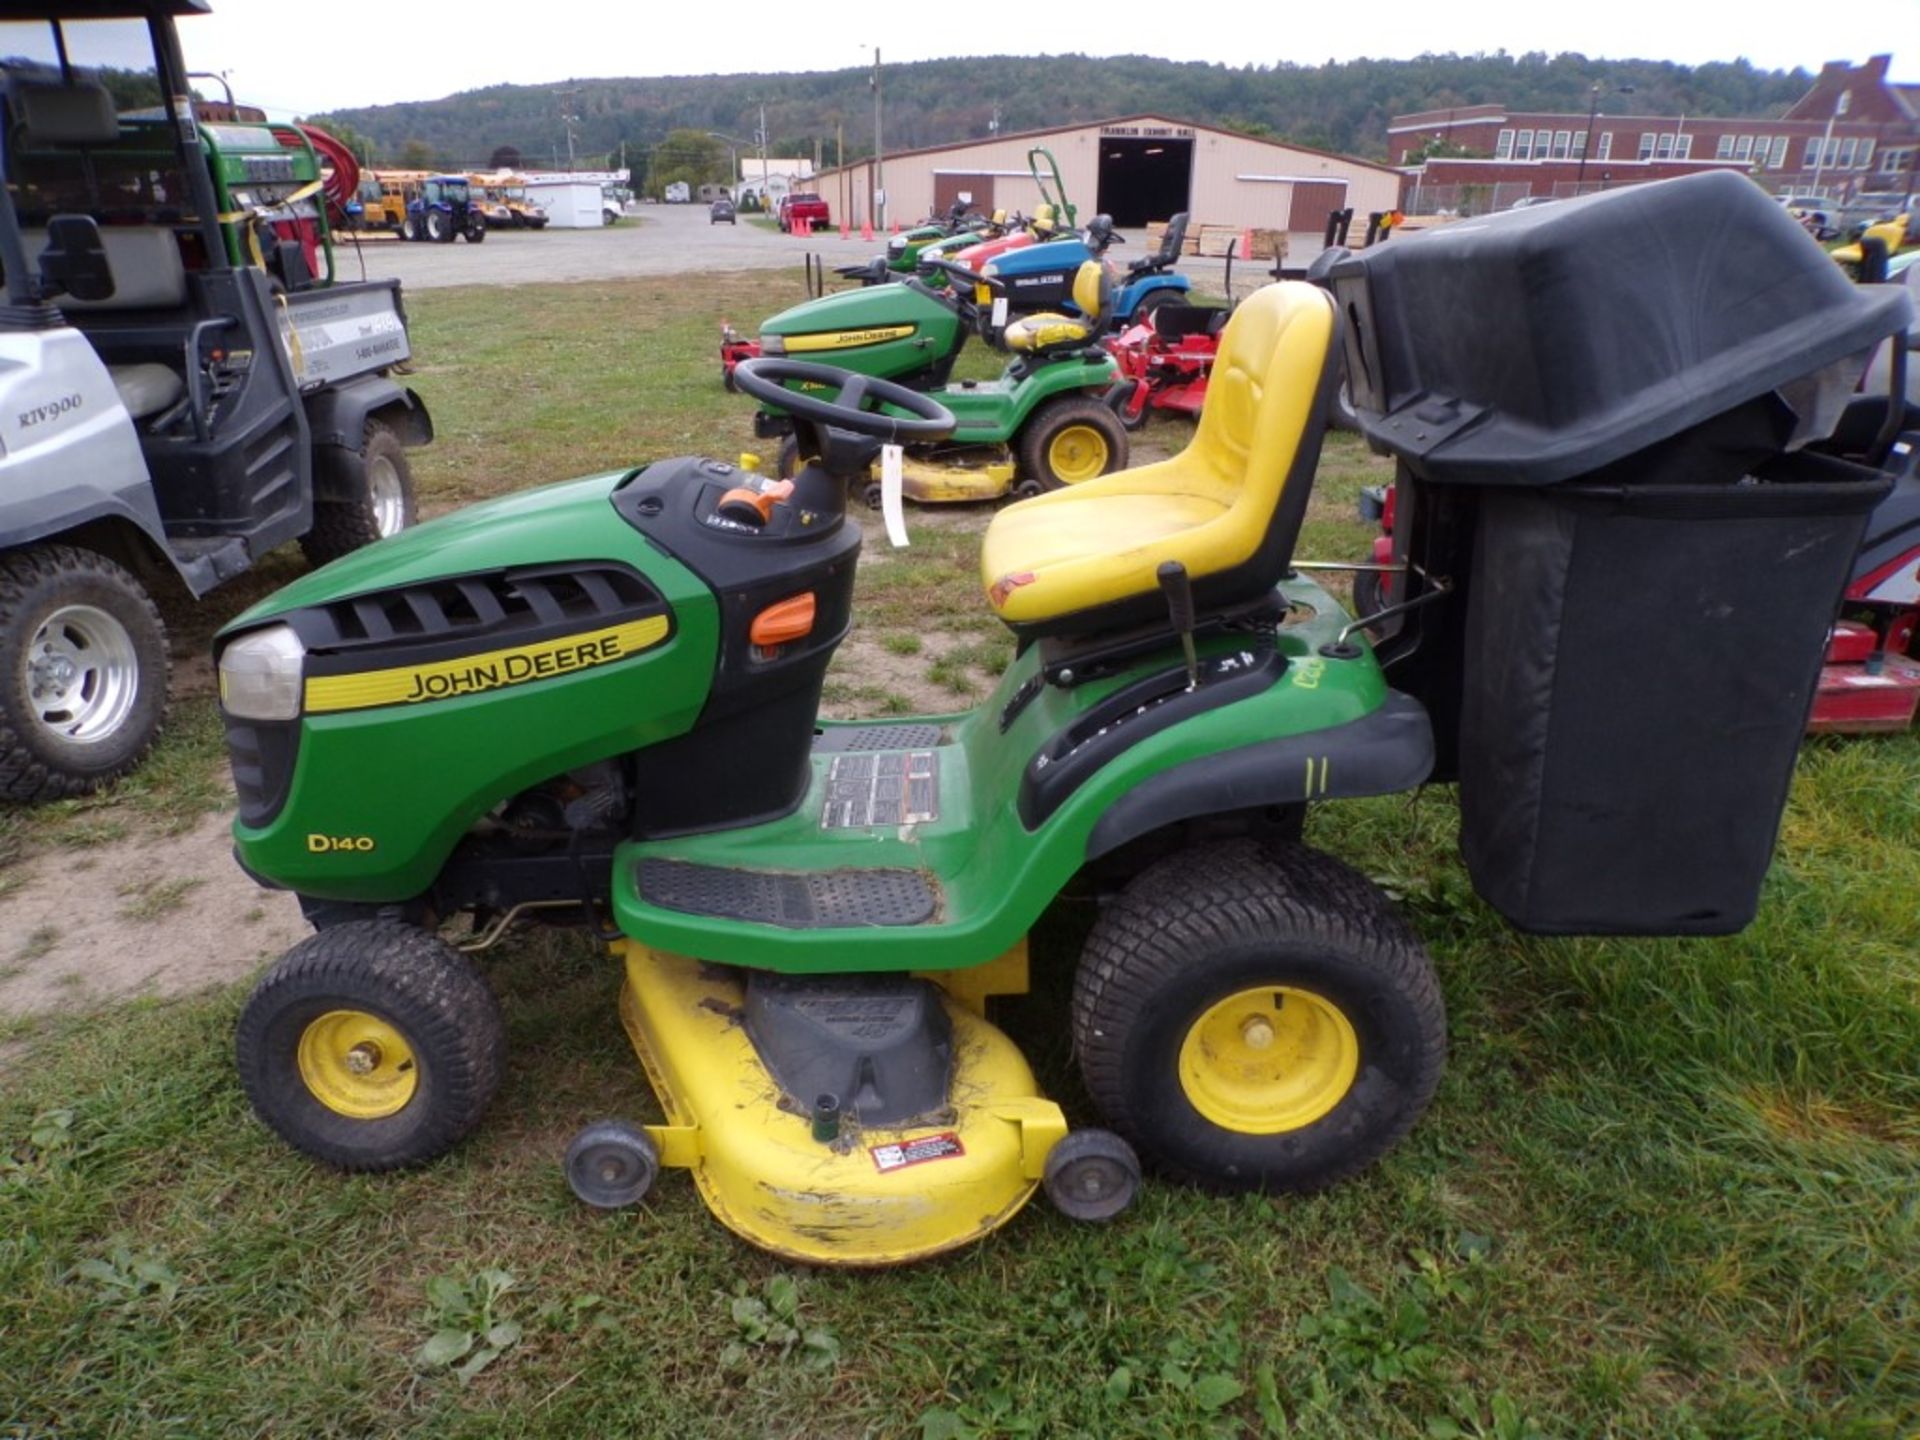 John Deere D140 Riding Mower w/48'' Deck, 22 HP Engine, Seat Is Ripped, Has Bagger, Looks